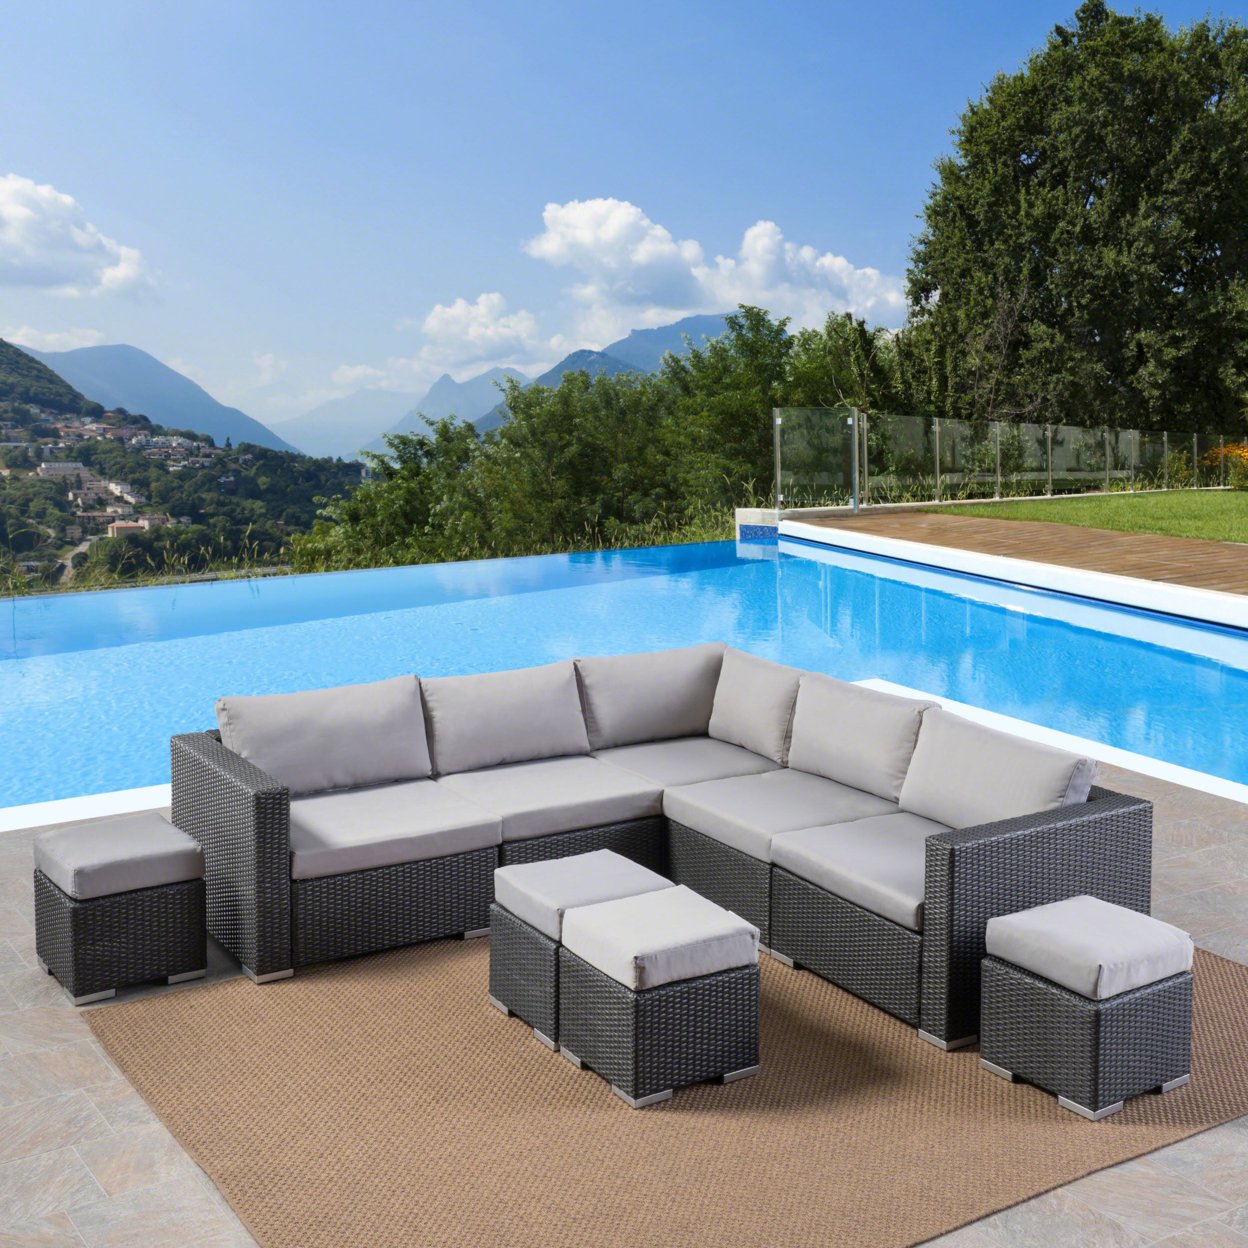 Tammy Rosa Outdoor 5 Seat Wicker Sectional Sofa Set With Aluminum Frame - Multi-brown/Beige